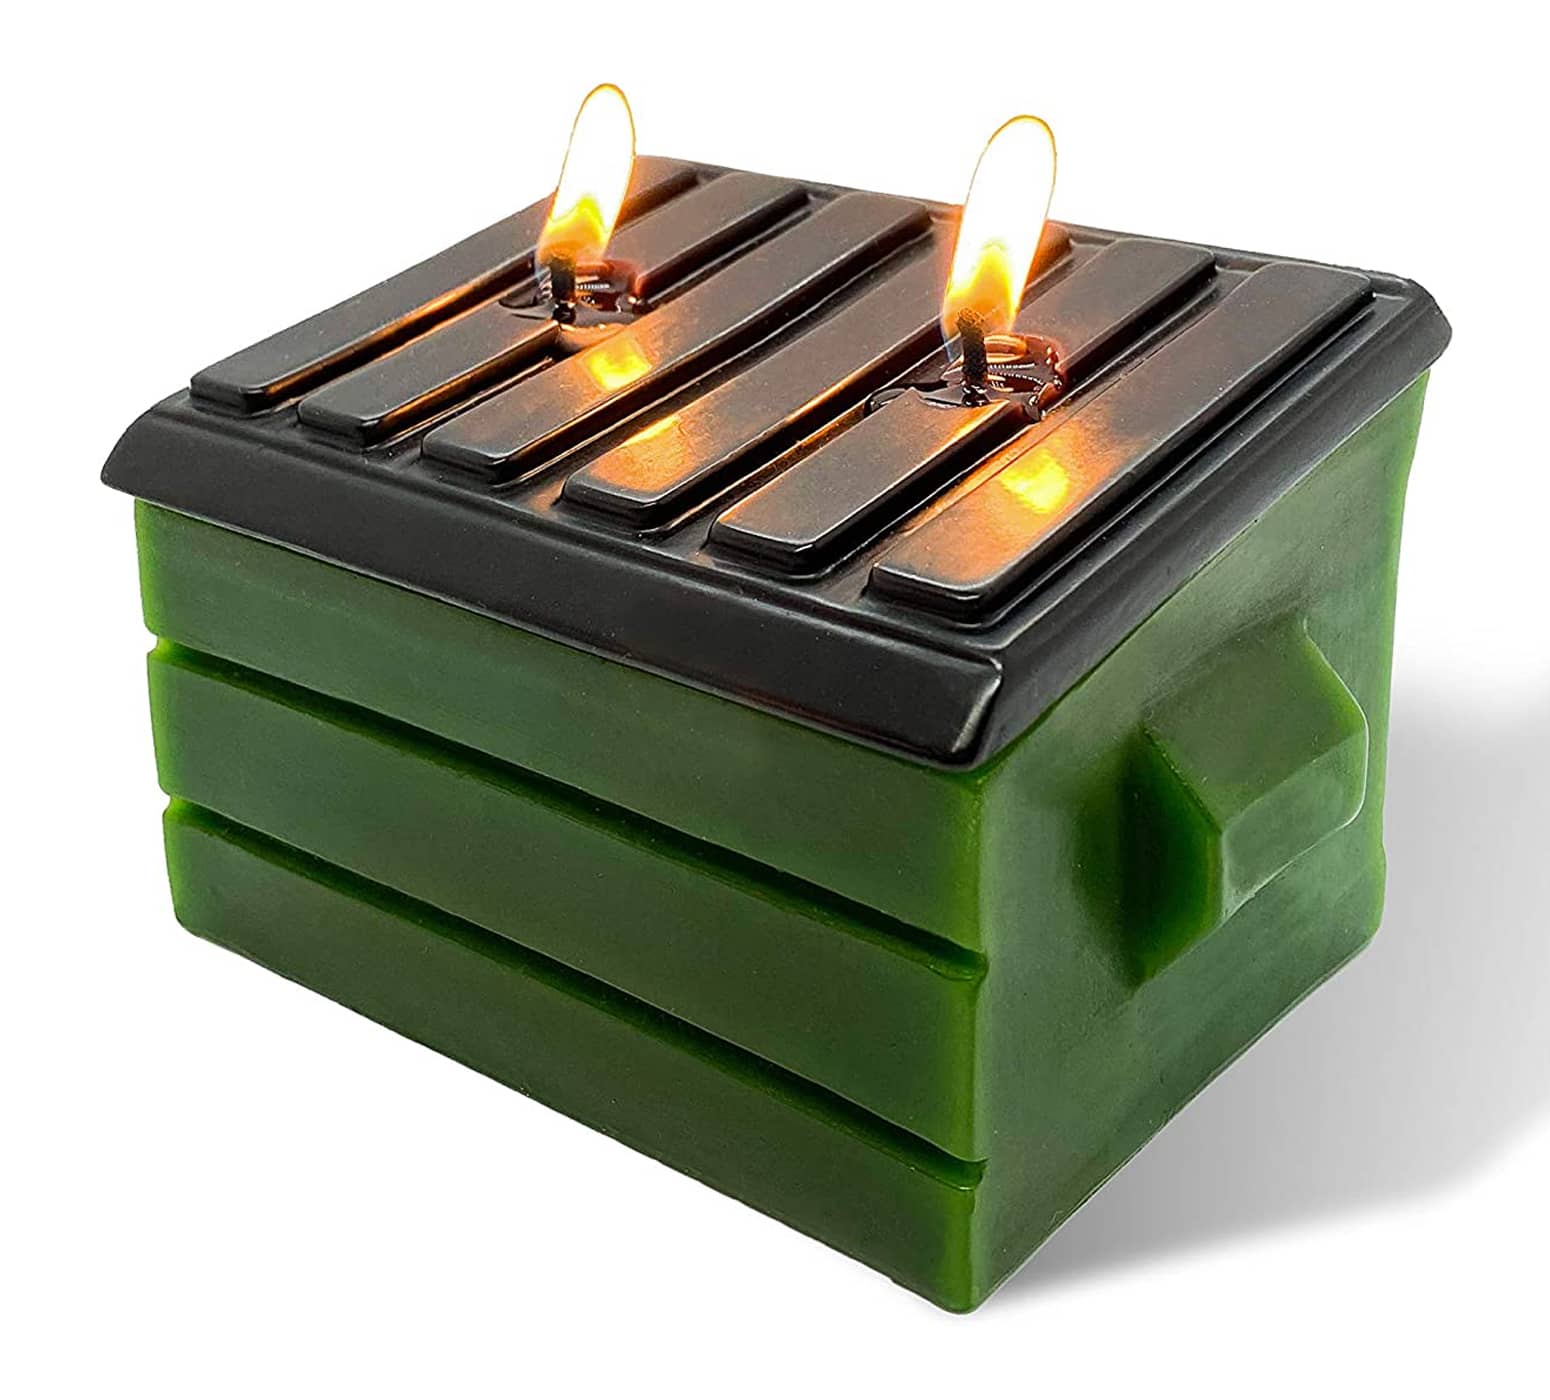 Dumpster Fire Candle